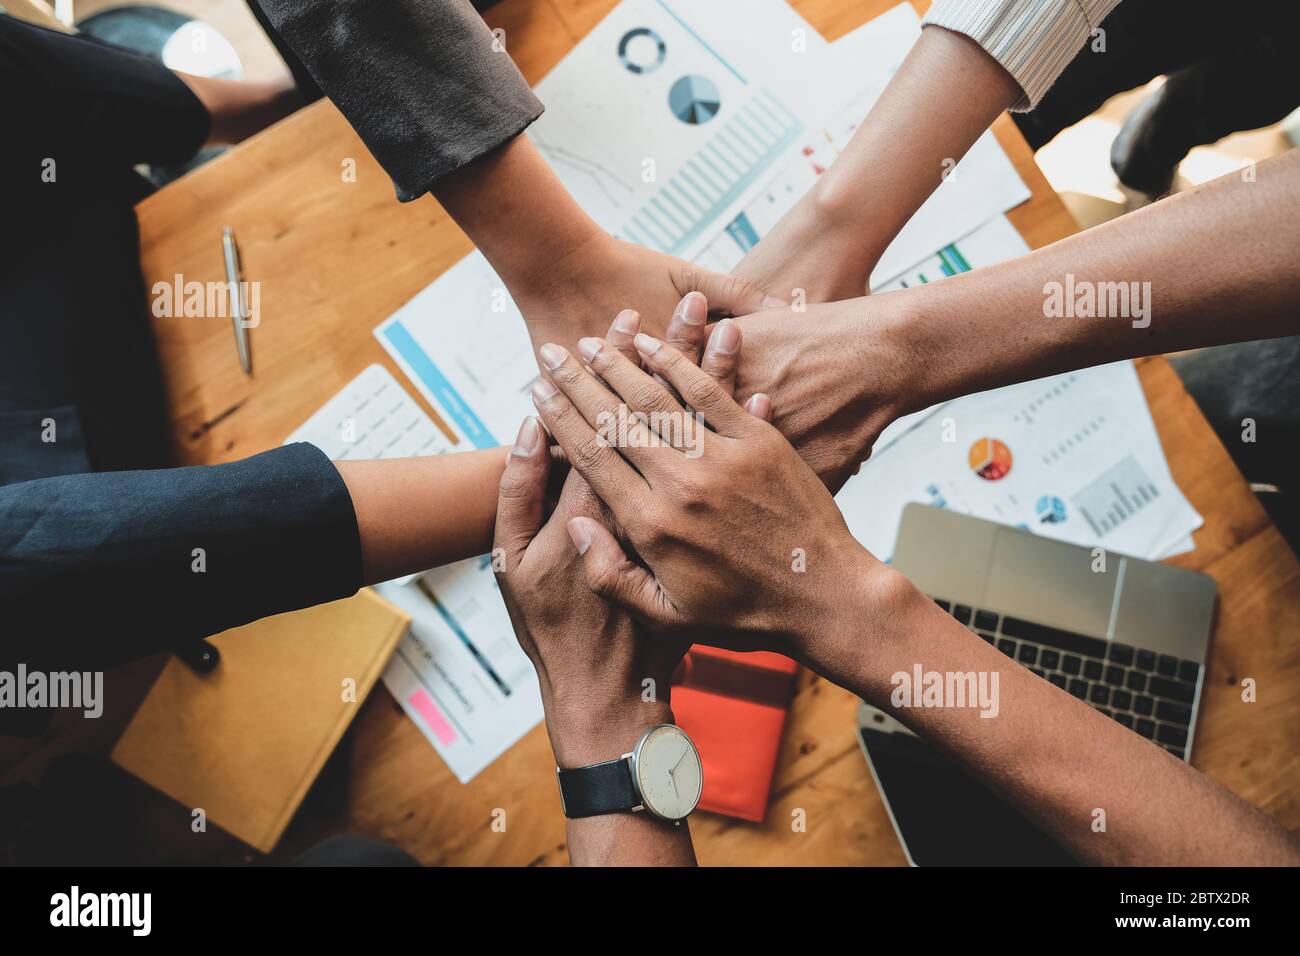 Teamwork Success. Business people group team happy showing teamwork and joining hands after meeting partner business Stock Photo